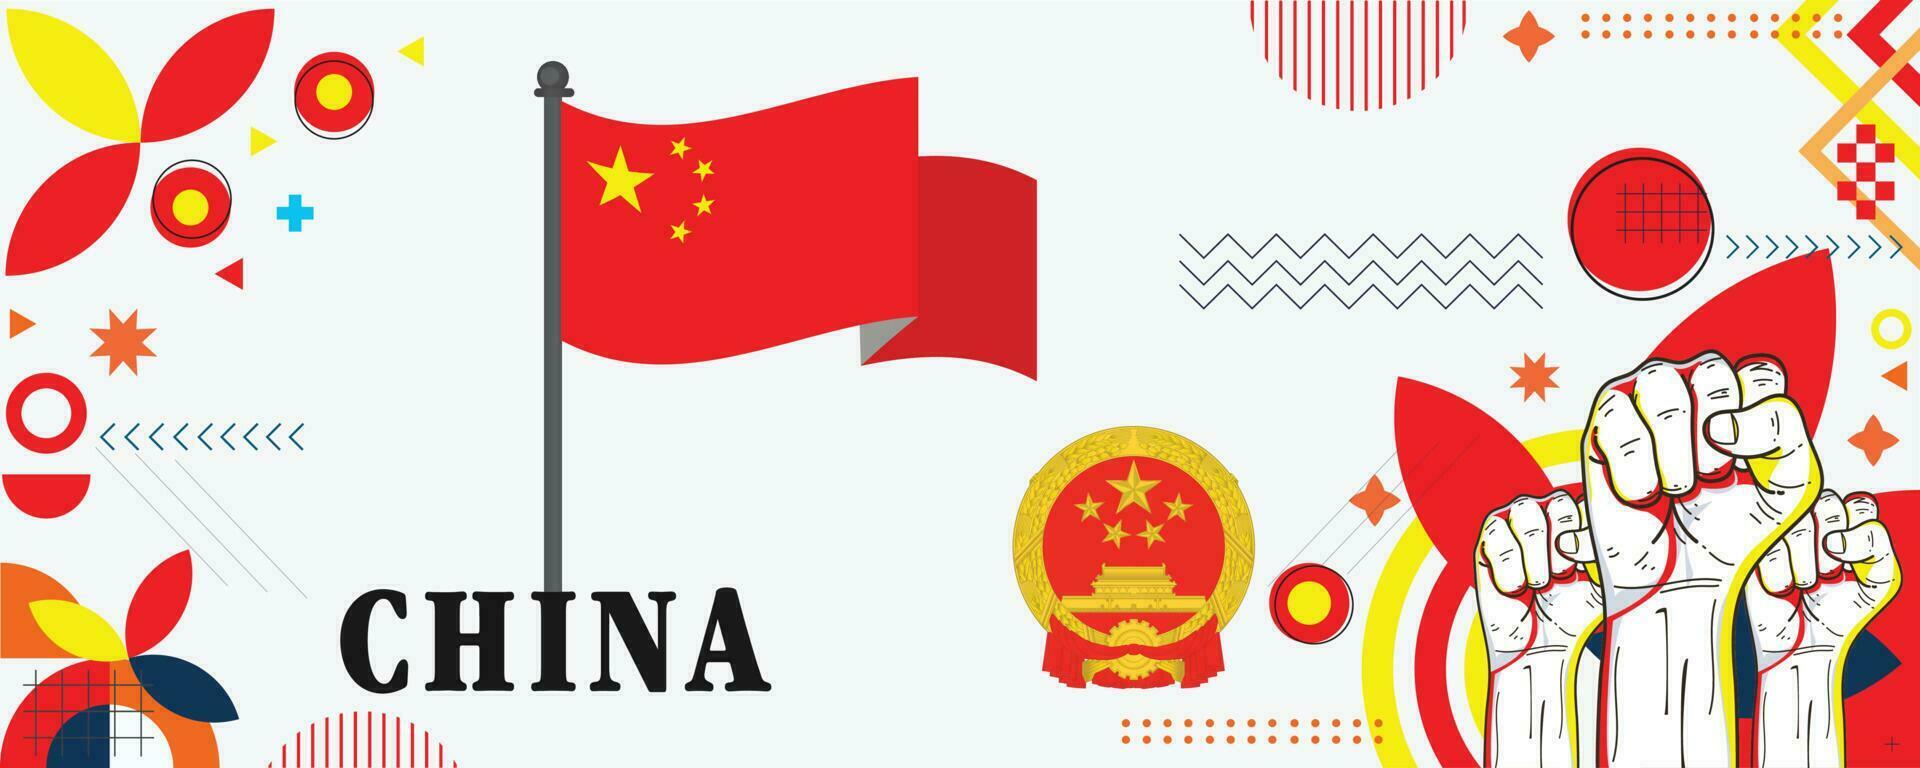 CHINA national day banner design vector eps